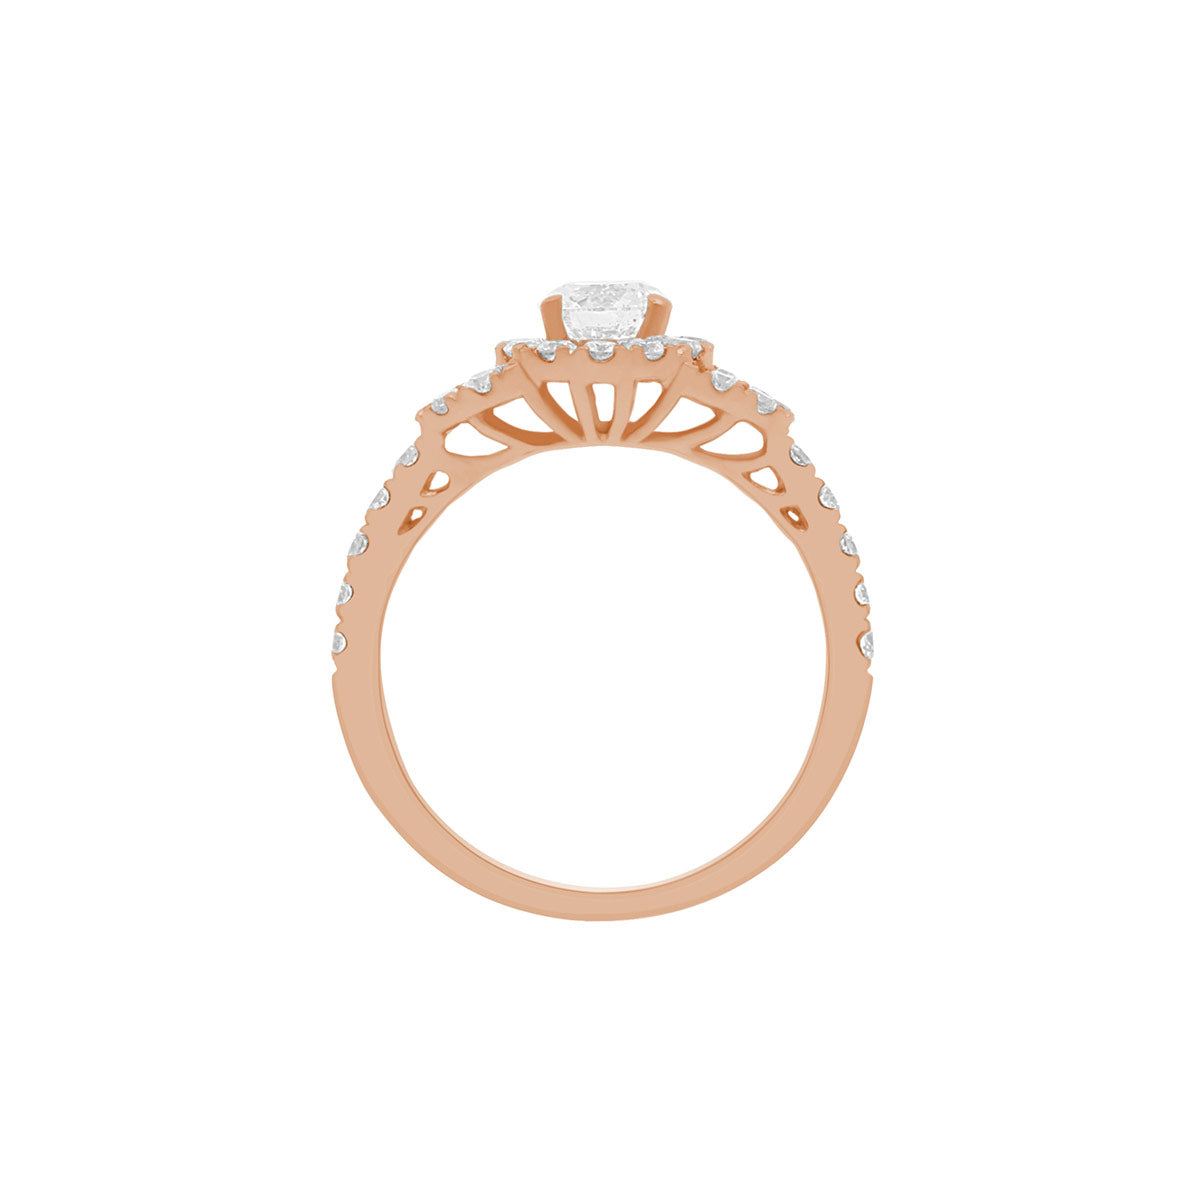 Triple Halo Engagement Ring  in rose gold in an upright verticle position